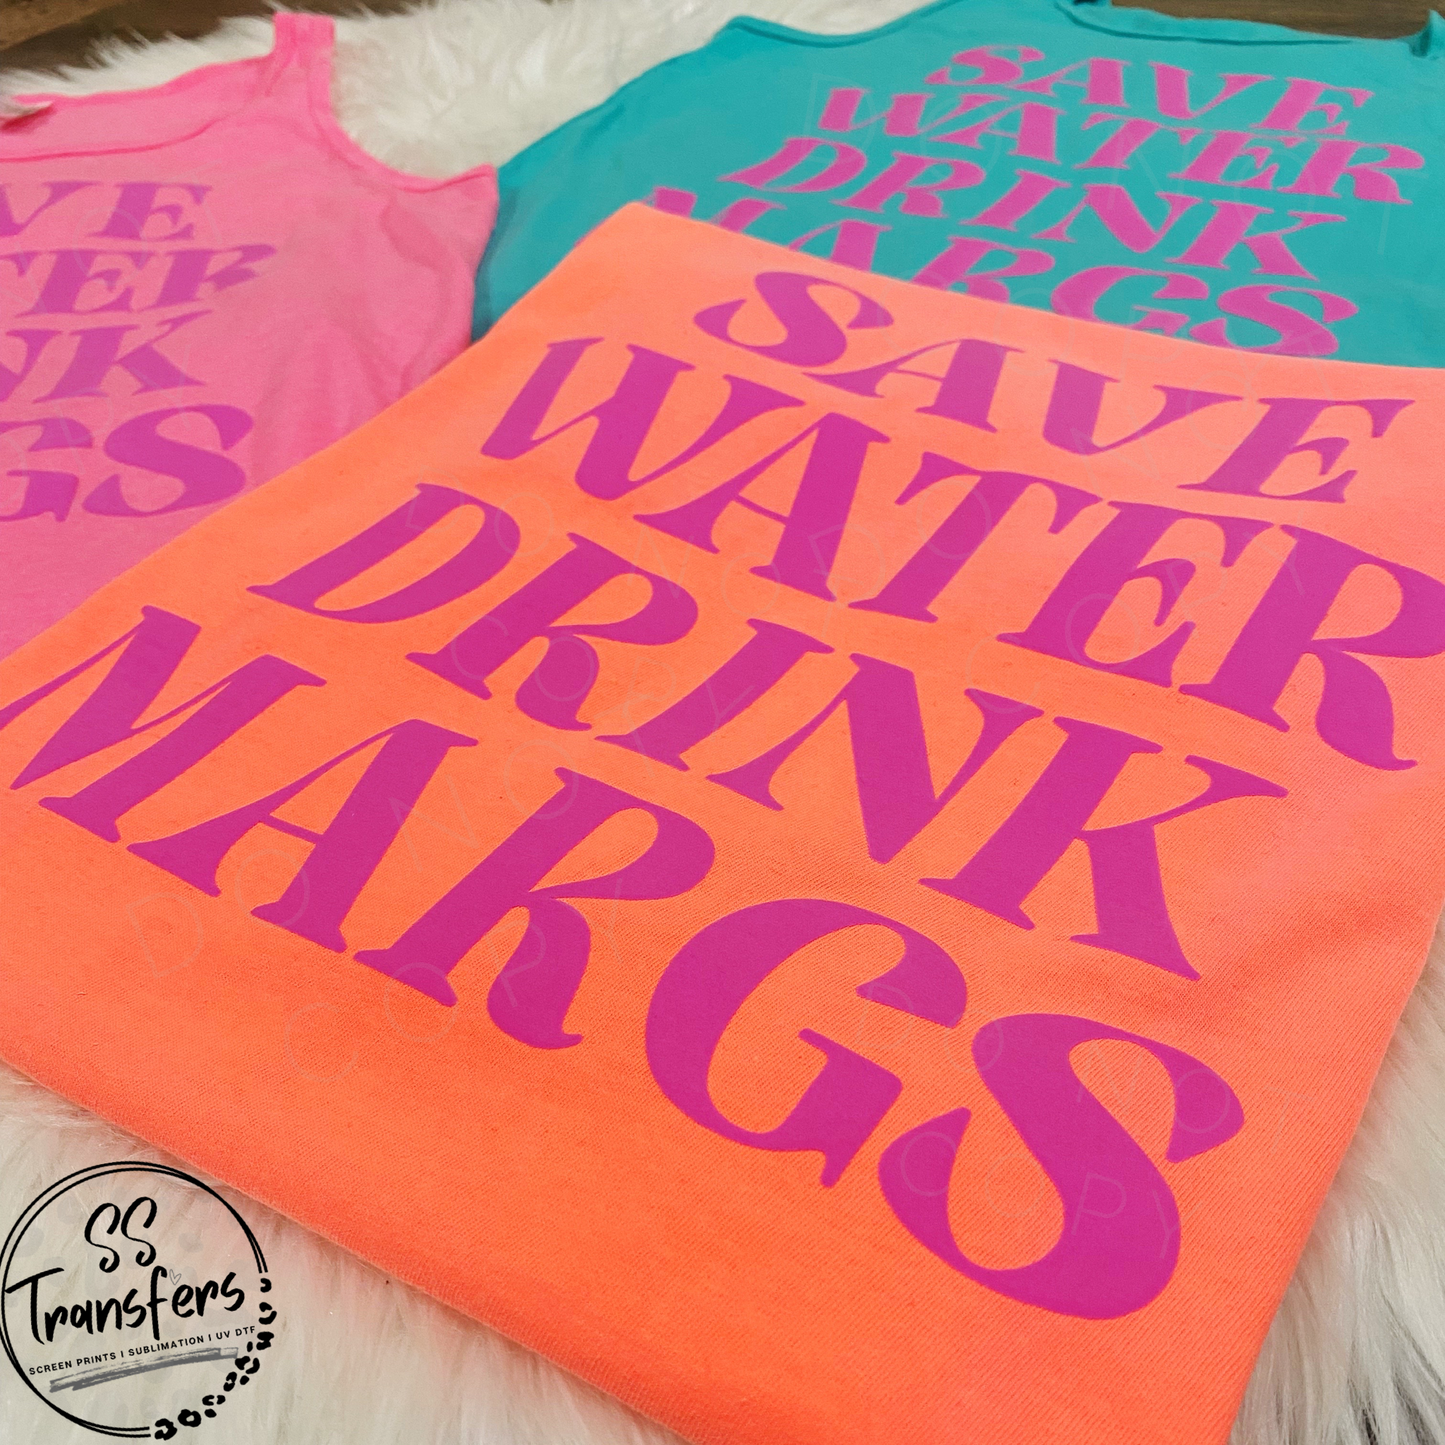 Save Water Drink Margs *SS Exclusive* PUFF Screen Print Transfer